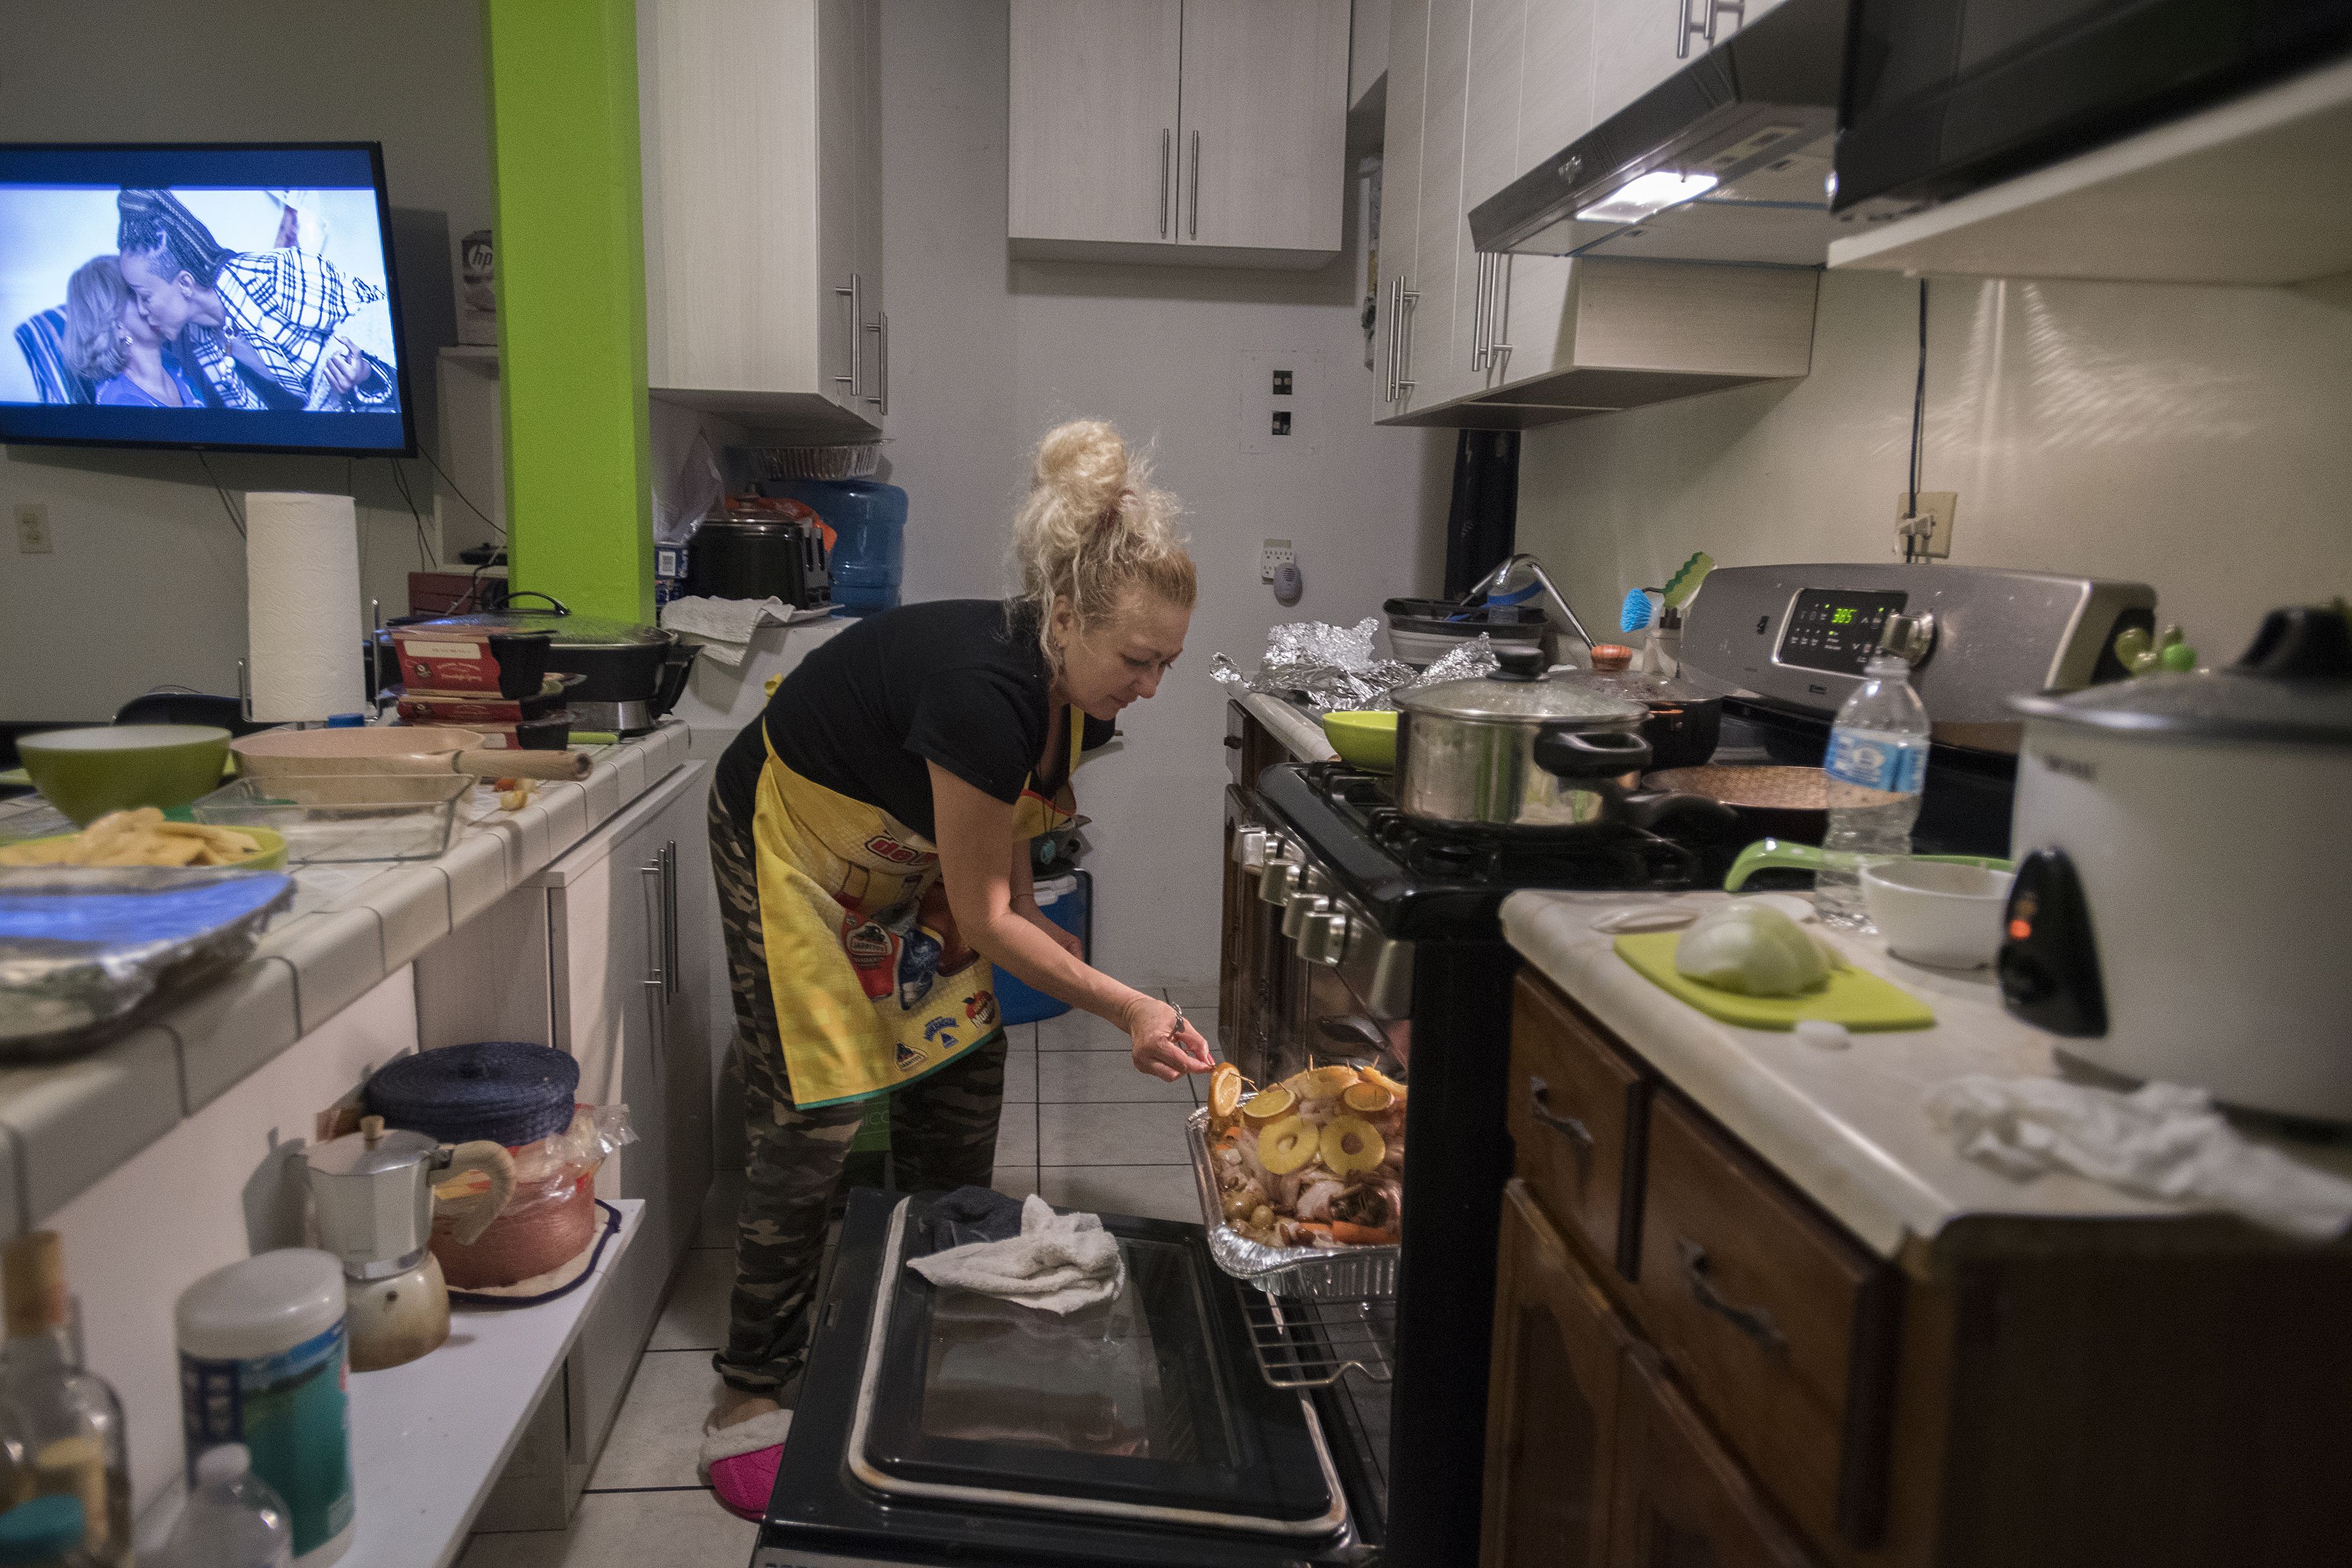 Enedis Flores takes a minute to check on the turkey, which is cooked with bacon, pineapple and oranges, while making Thanksgiving dinner for her family in her husband’s Tijuana apartment. Image by Amanda Cowan. Mexico, 2019.